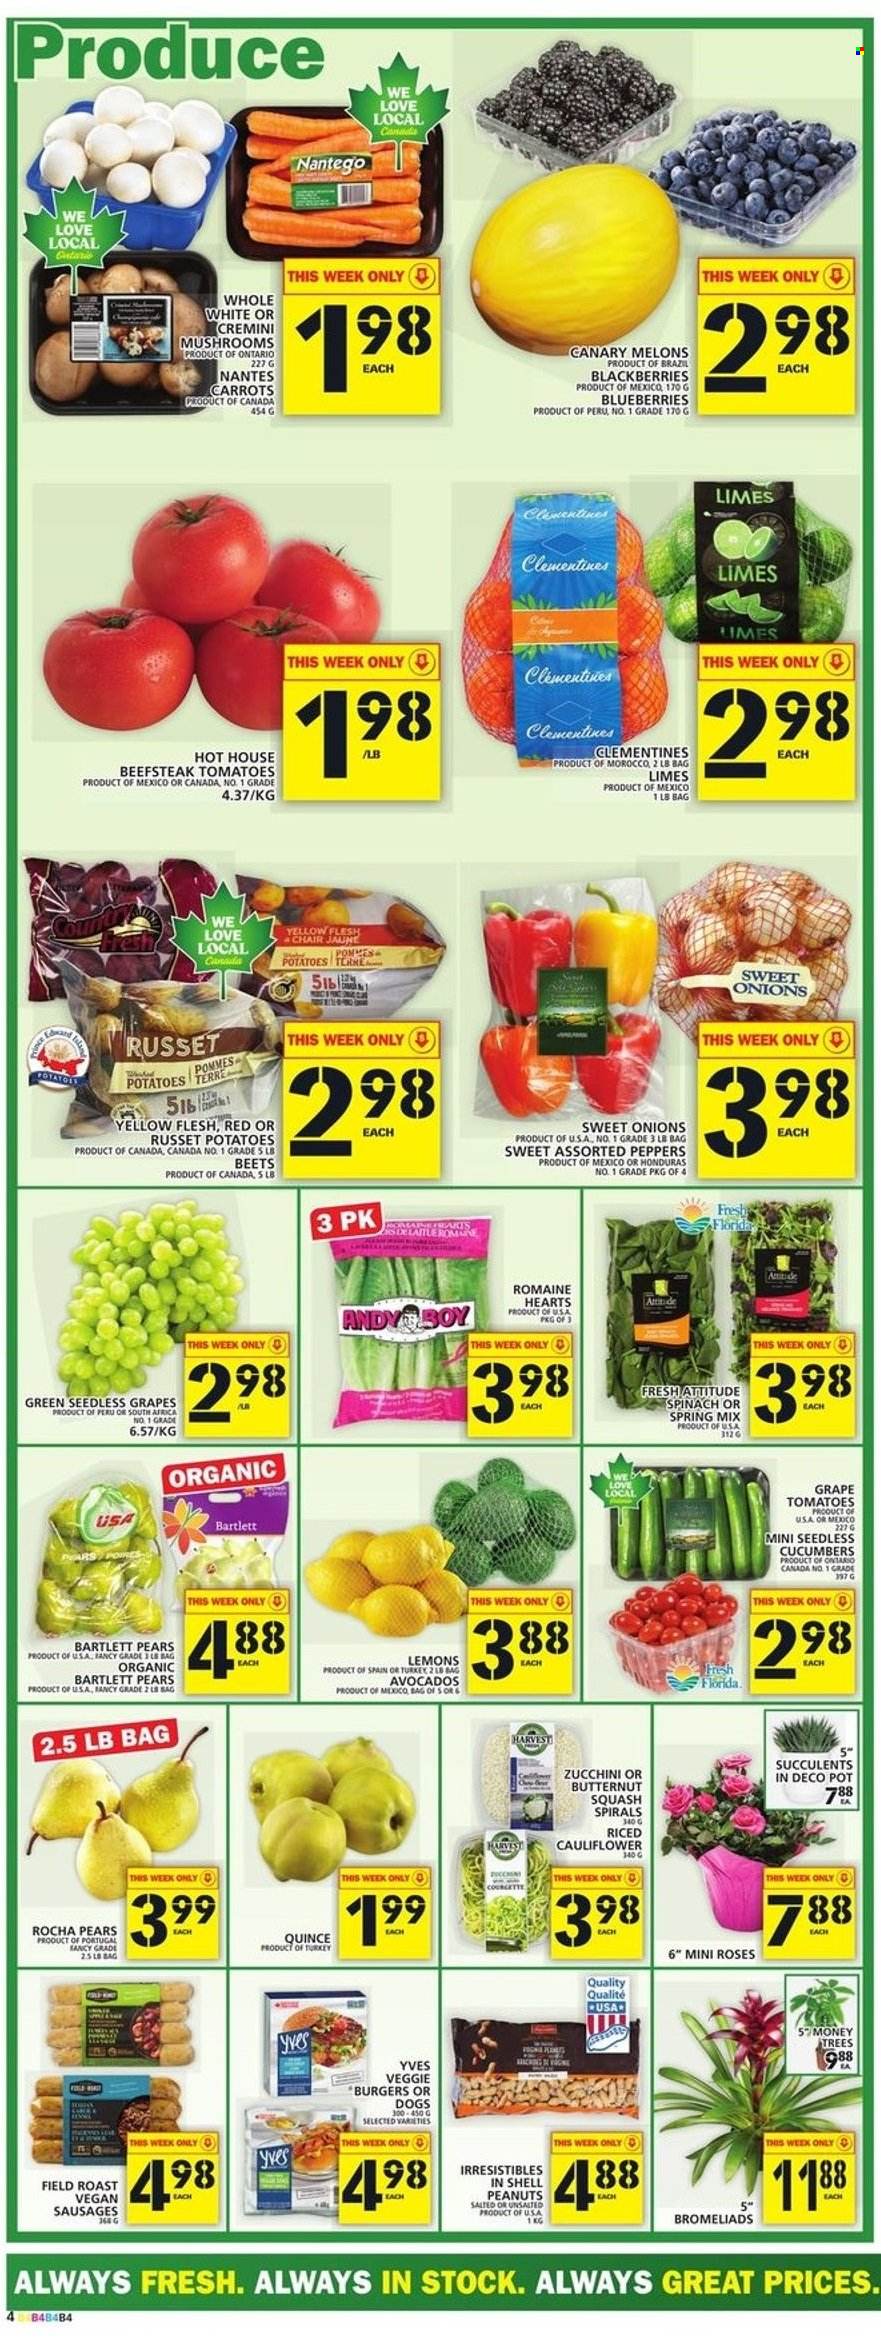 thumbnail - Food Basics Flyer - January 13, 2022 - January 19, 2022 - Sales products - mushrooms, butternut squash, carrots, cucumber, russet potatoes, tomatoes, zucchini, potatoes, peppers, avocado, Bartlett pears, blackberries, blueberries, clementines, limes, quince, seedless grapes, pears, melons, lemons, veggie burger, sausage, peanuts, pot. Page 4.